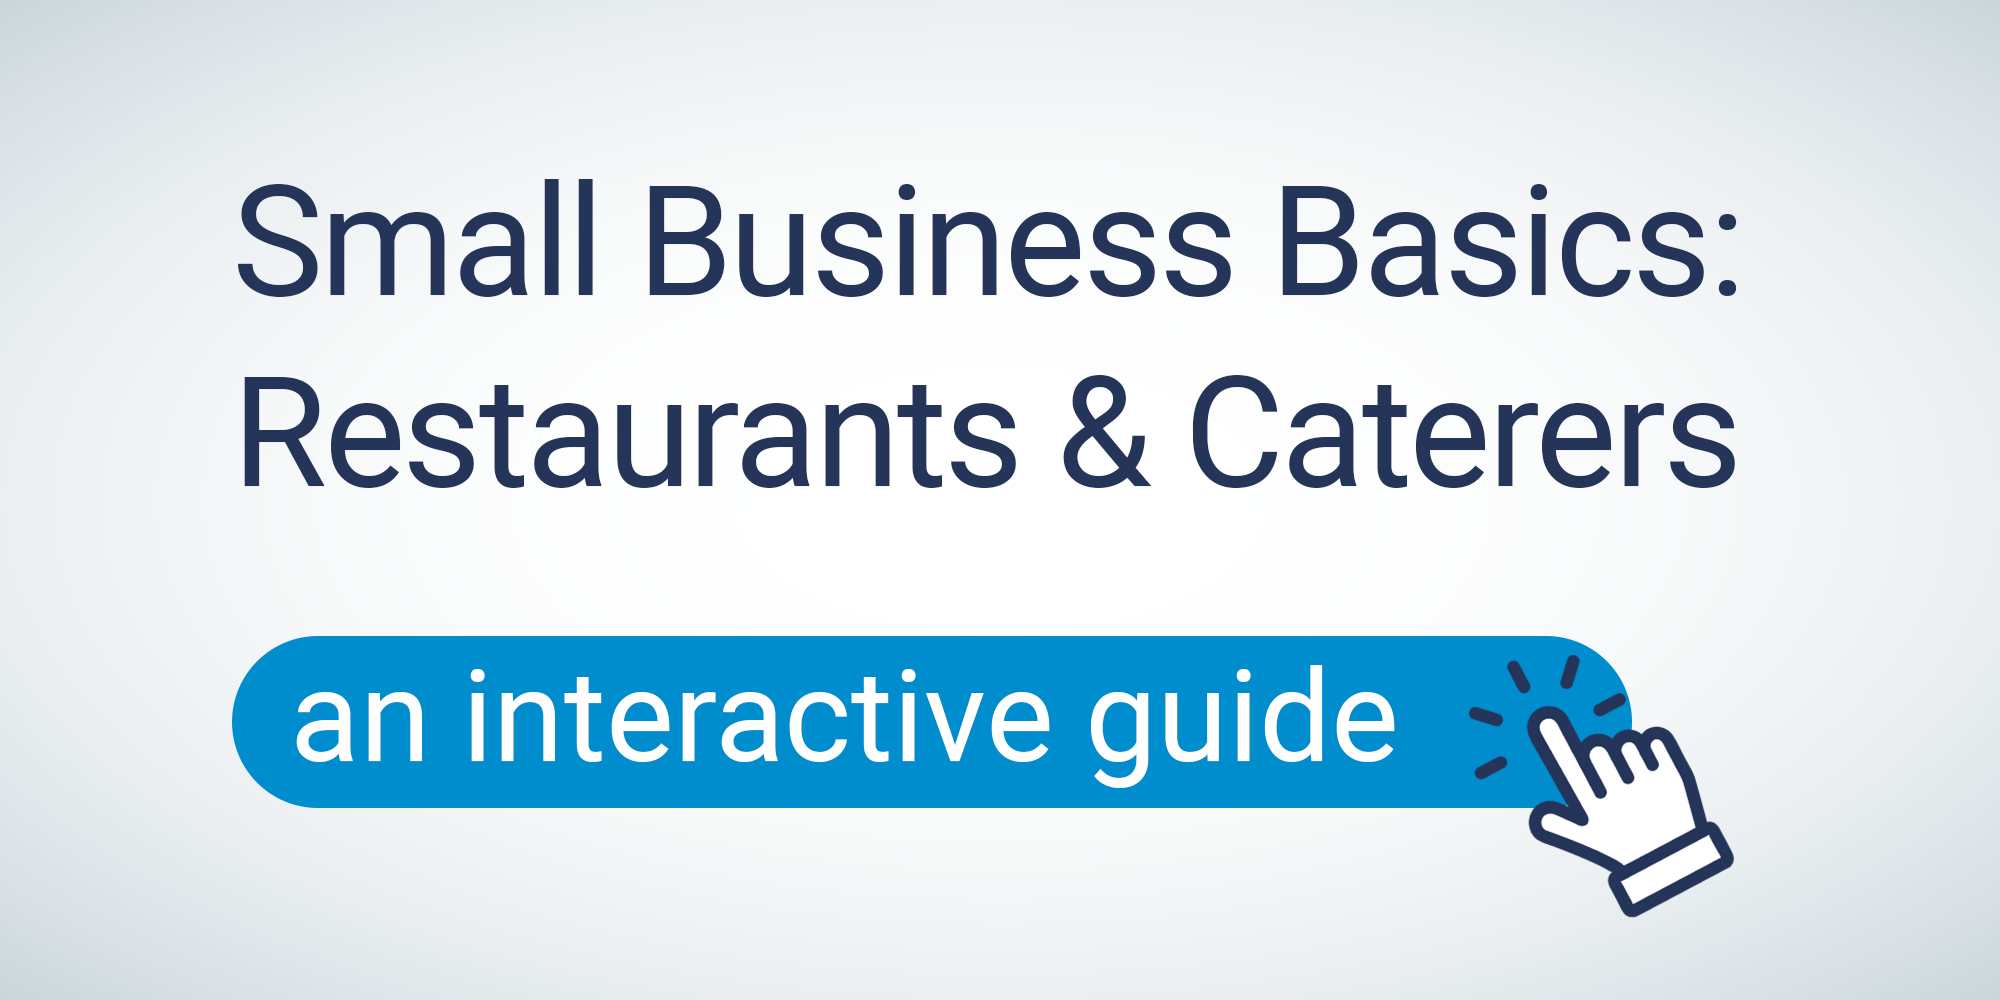 Image with text small business basics: restaurants & caterers an interactive guide